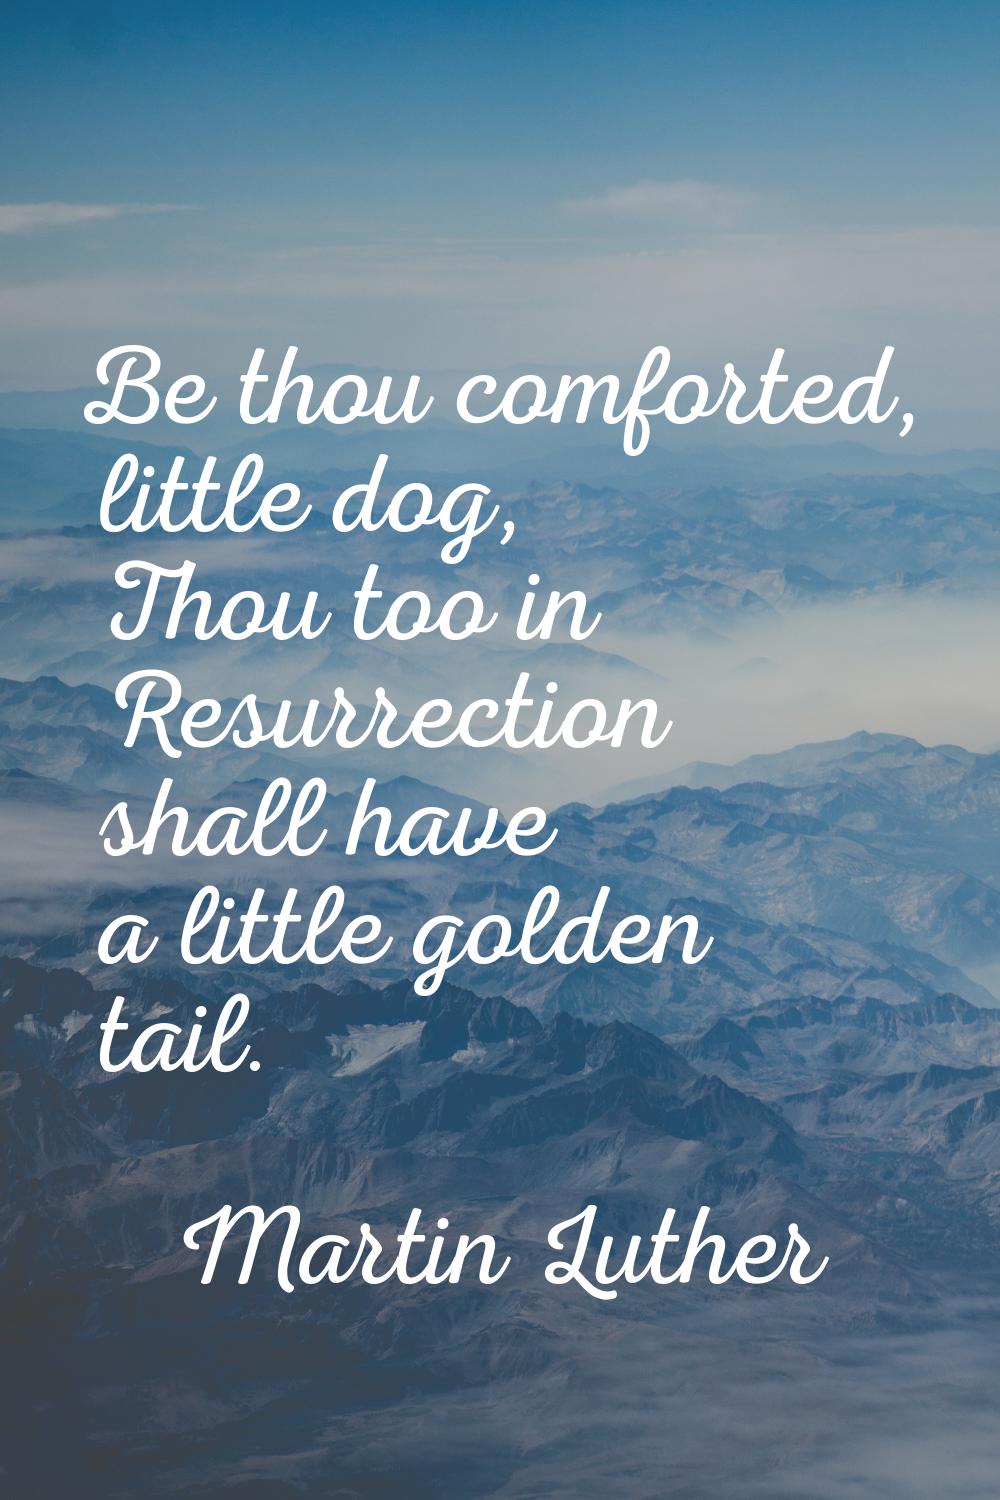 Be thou comforted, little dog, Thou too in Resurrection shall have a little golden tail.